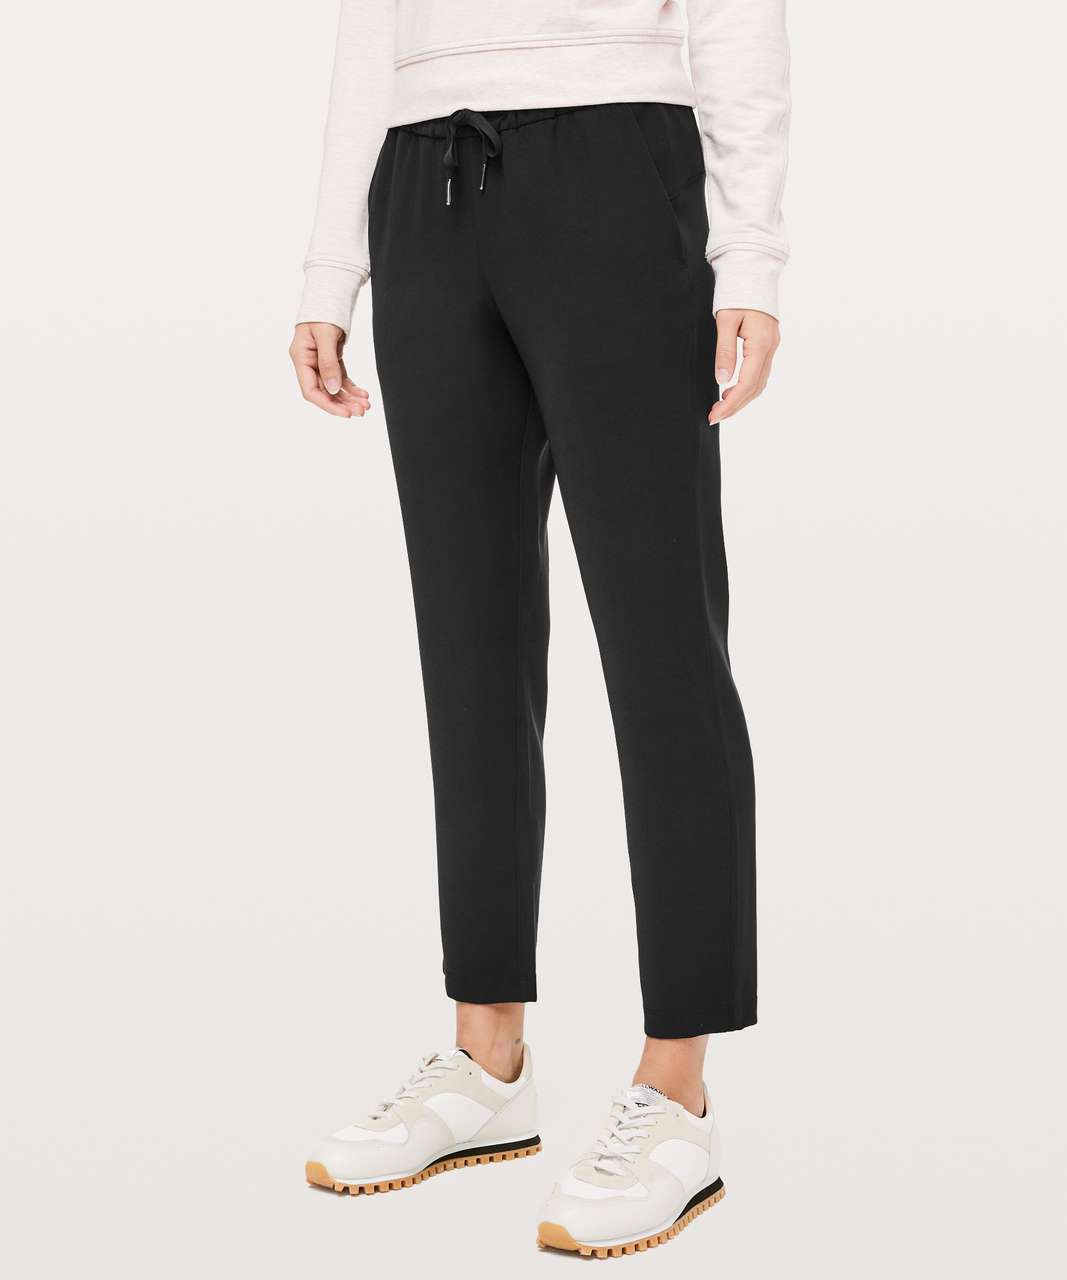 on the fly pant woven lululemon